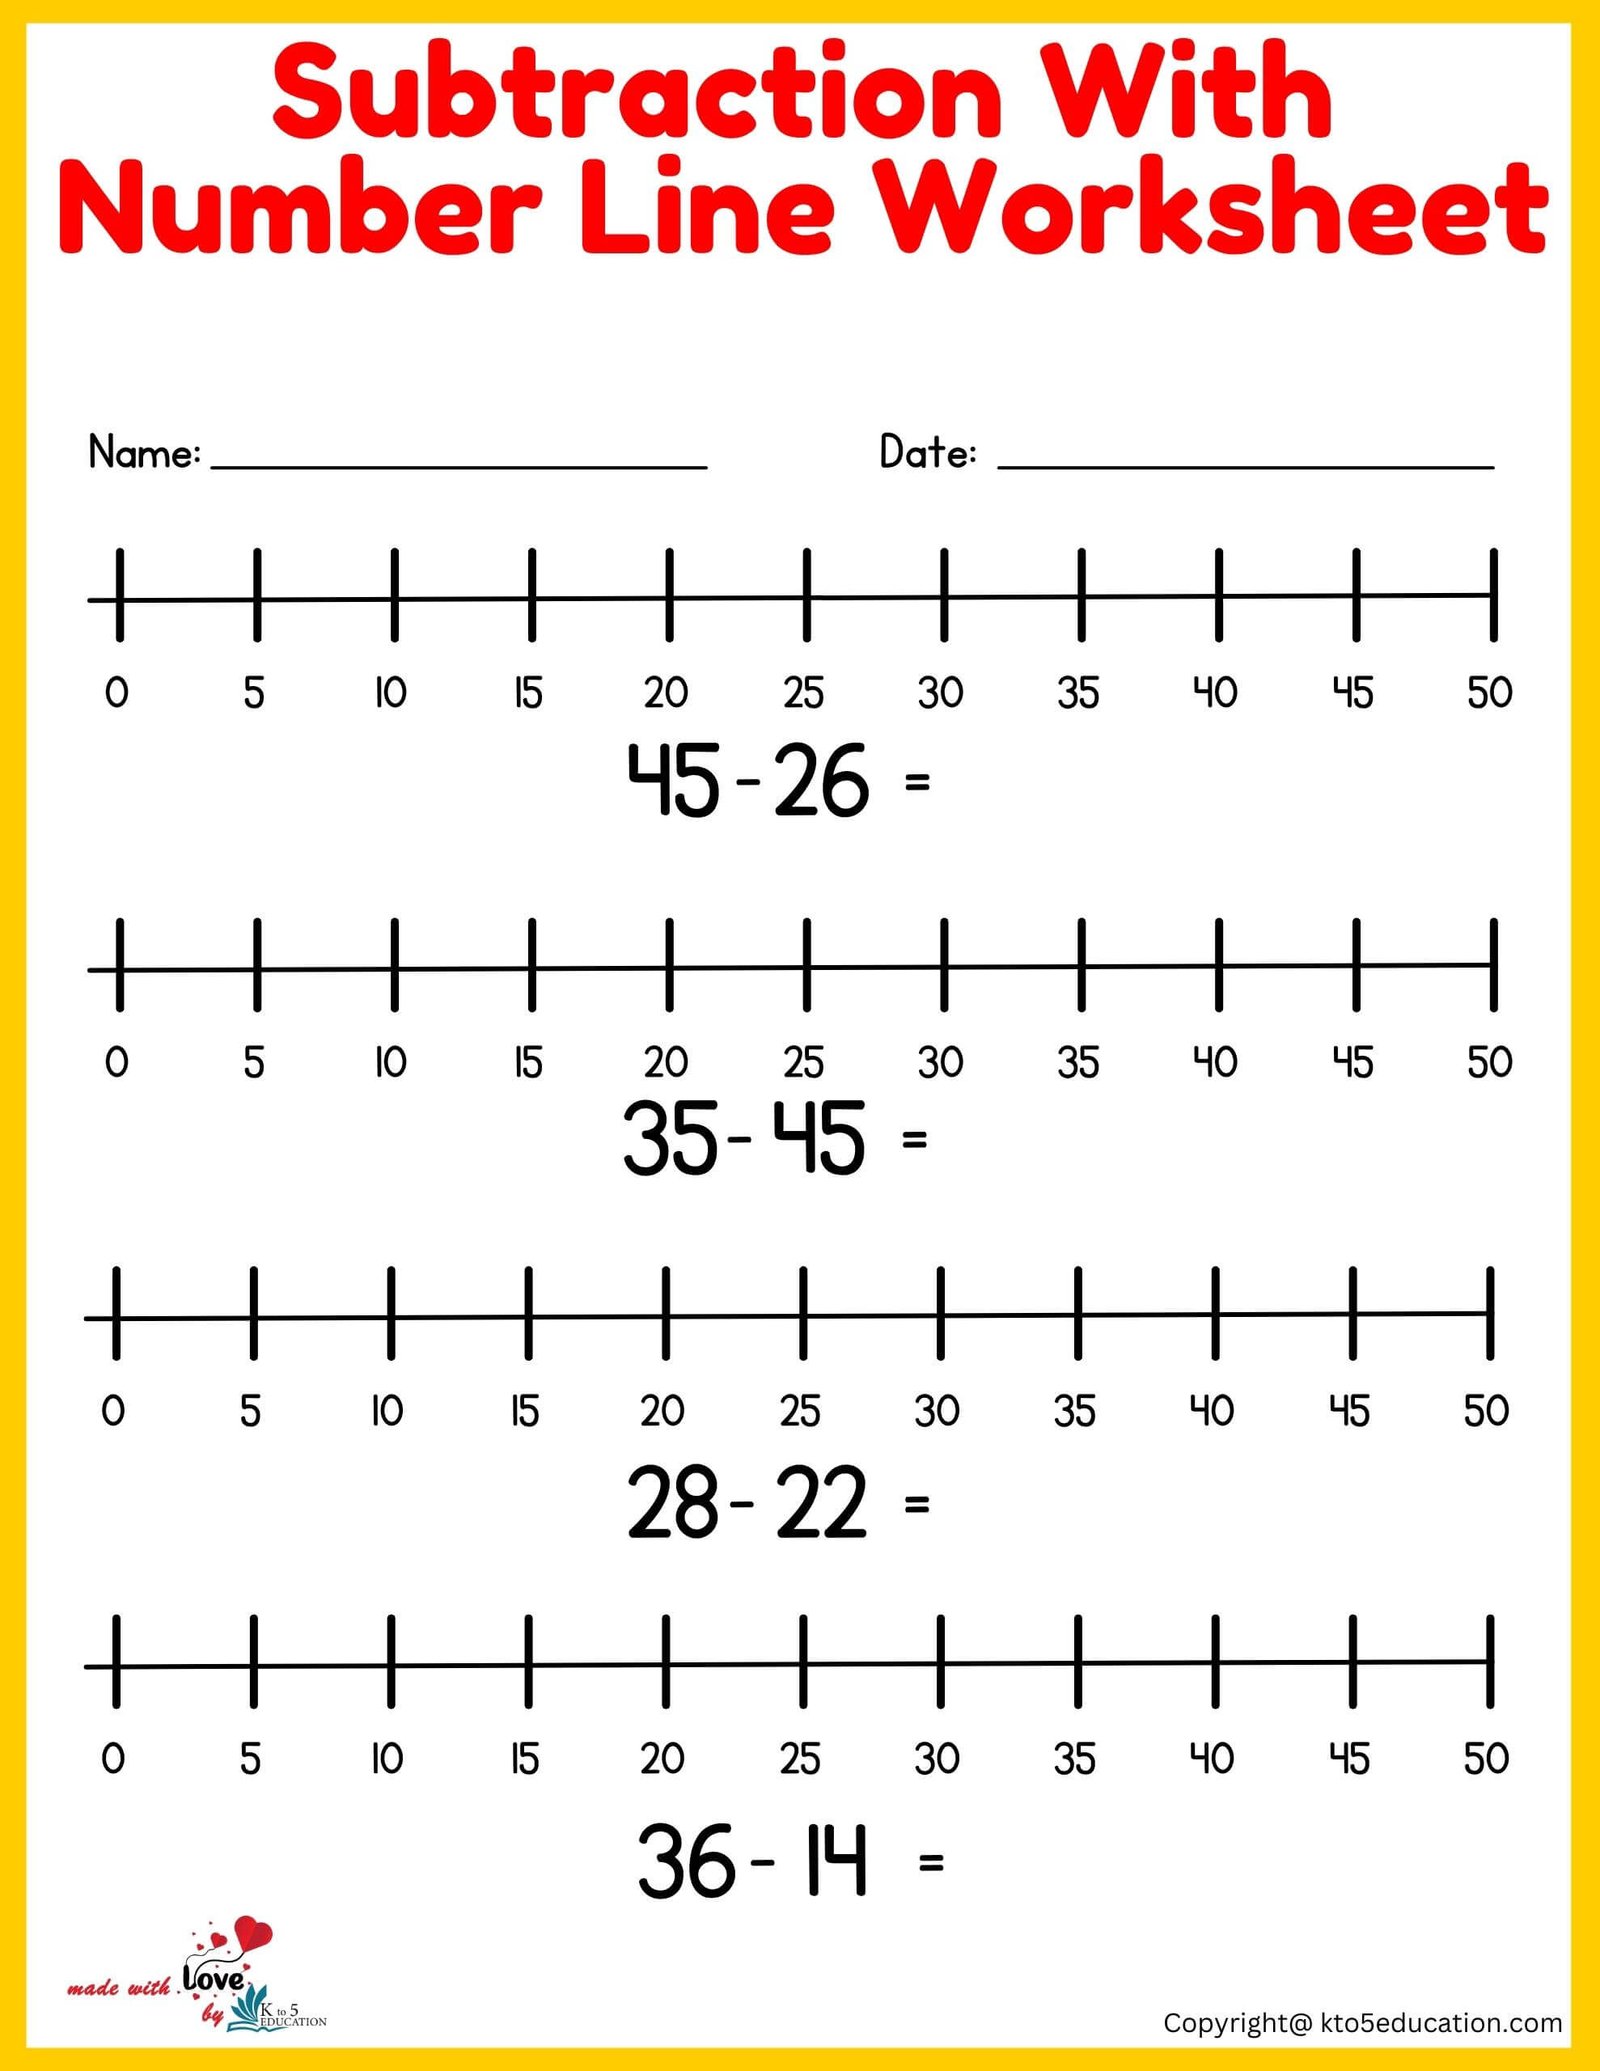 Free Subtraction With Number Line Worksheet 1-50